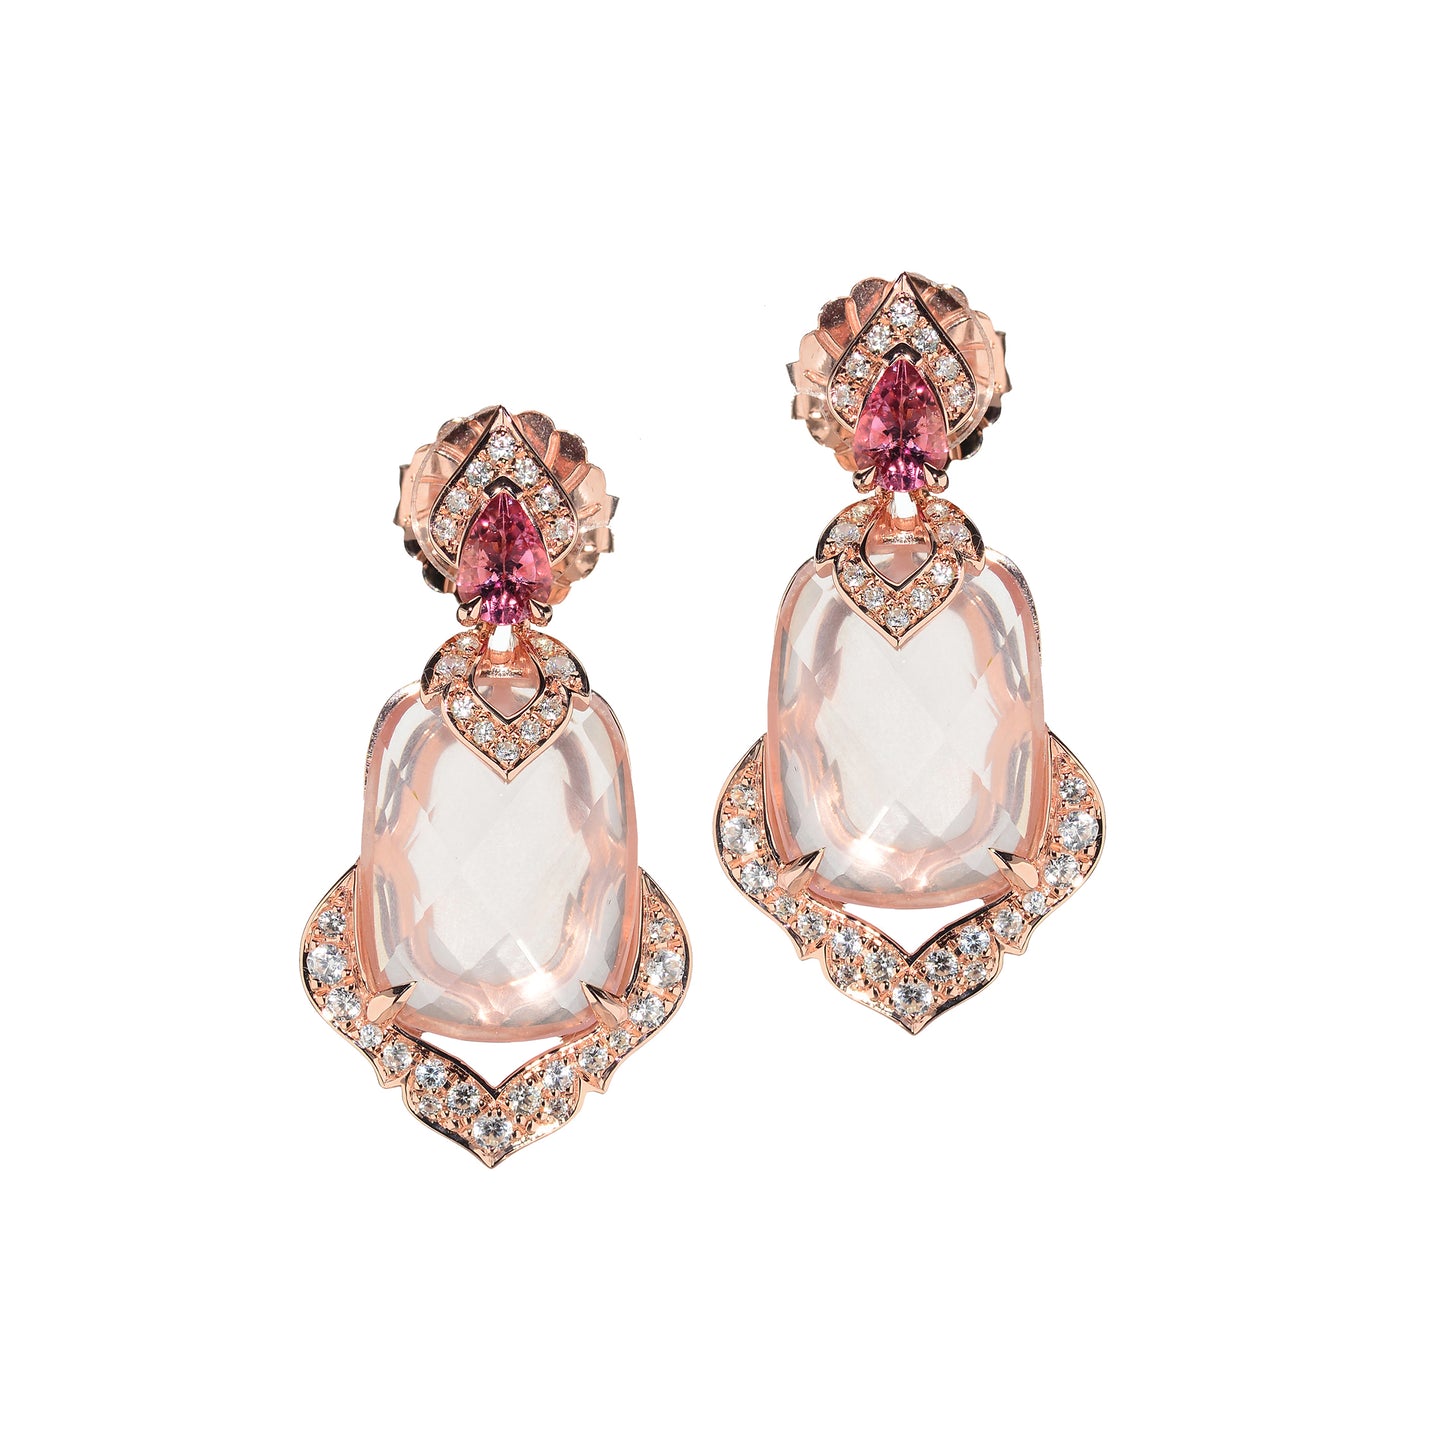 Stand out & Shine - Rose Quartz Statement Earrings